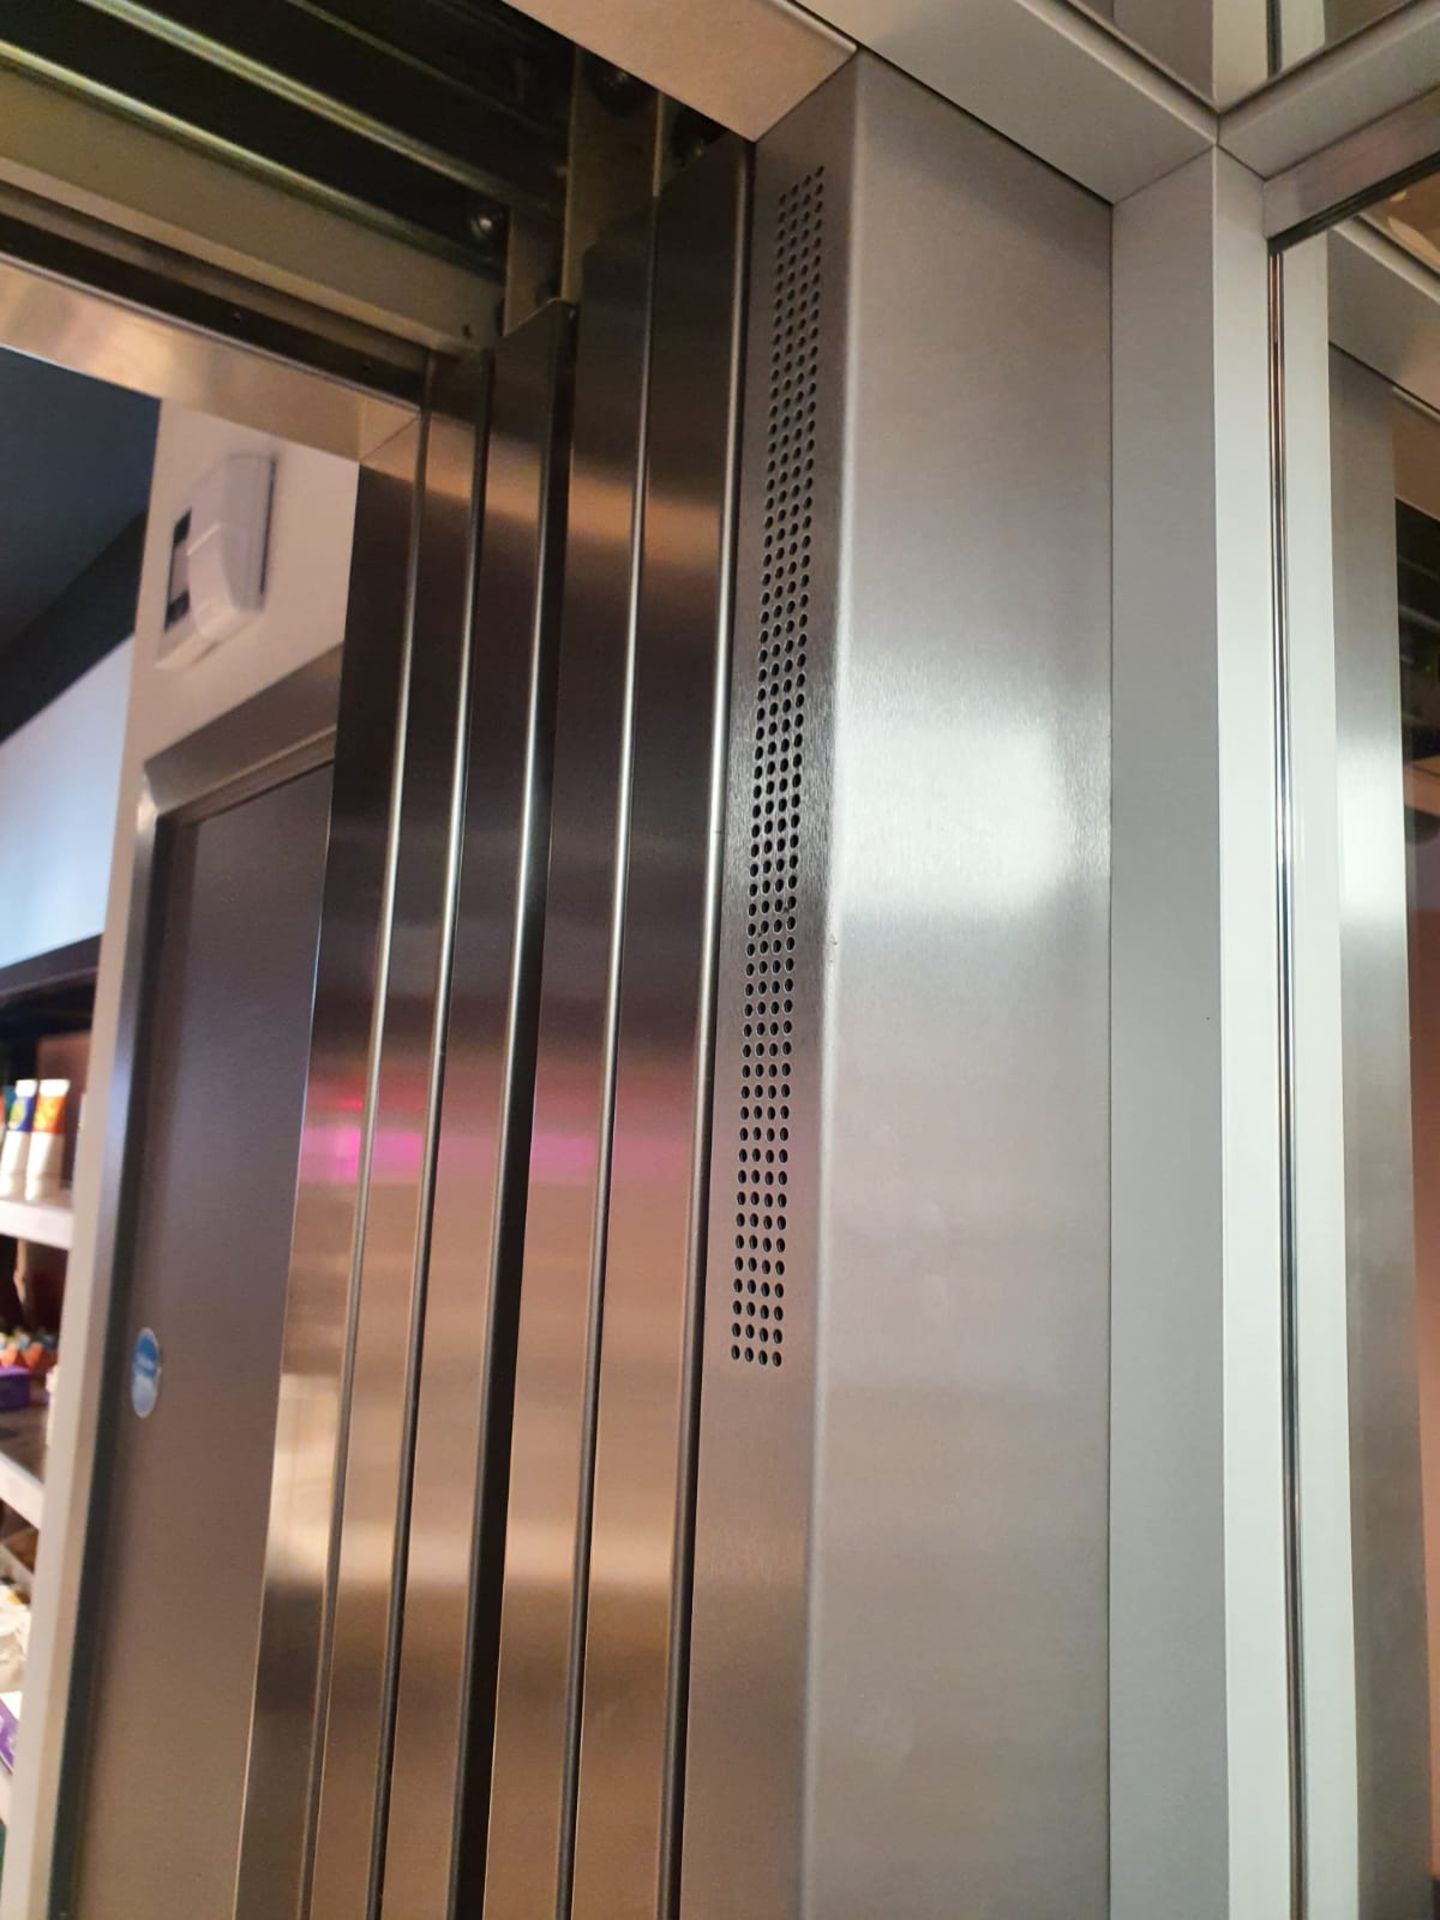 1 x Stannah Elevator Lift - Max Capacity 5 People / 400kg - Internal Dimensions H200 x W110 x D140 - Image 7 of 13